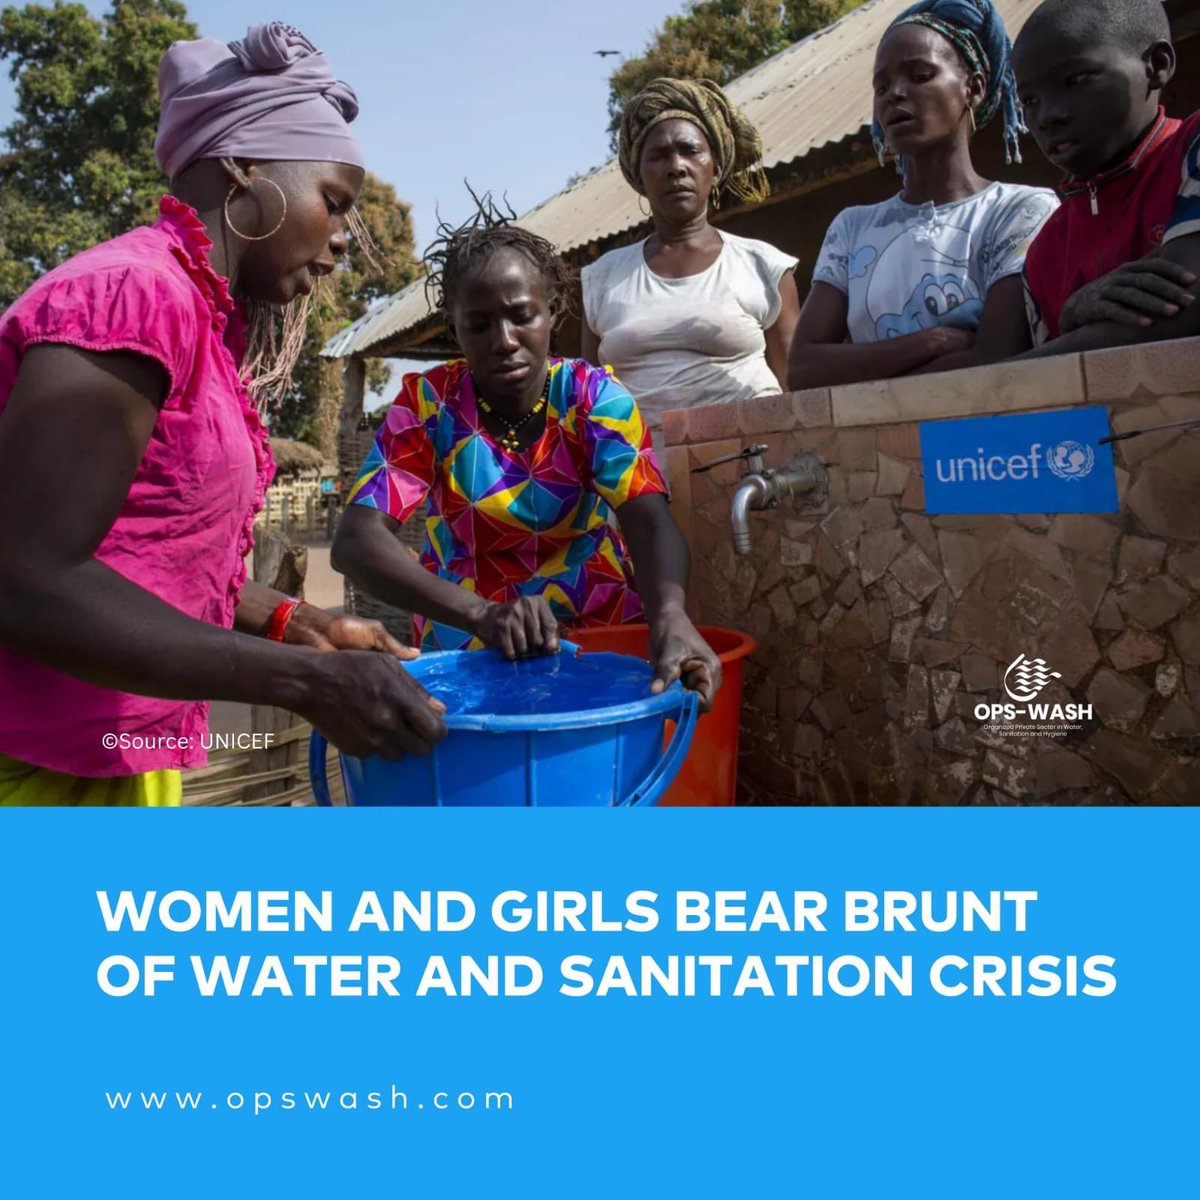 📣 According to a new WHO-UNICEF report, women and girls bear the brunt of water and sanitation crisis. From travelling to fetch water, to inadequate and unsafe sanitation facilities, to health risks from lack of handwashing #sdg6 #water 💧